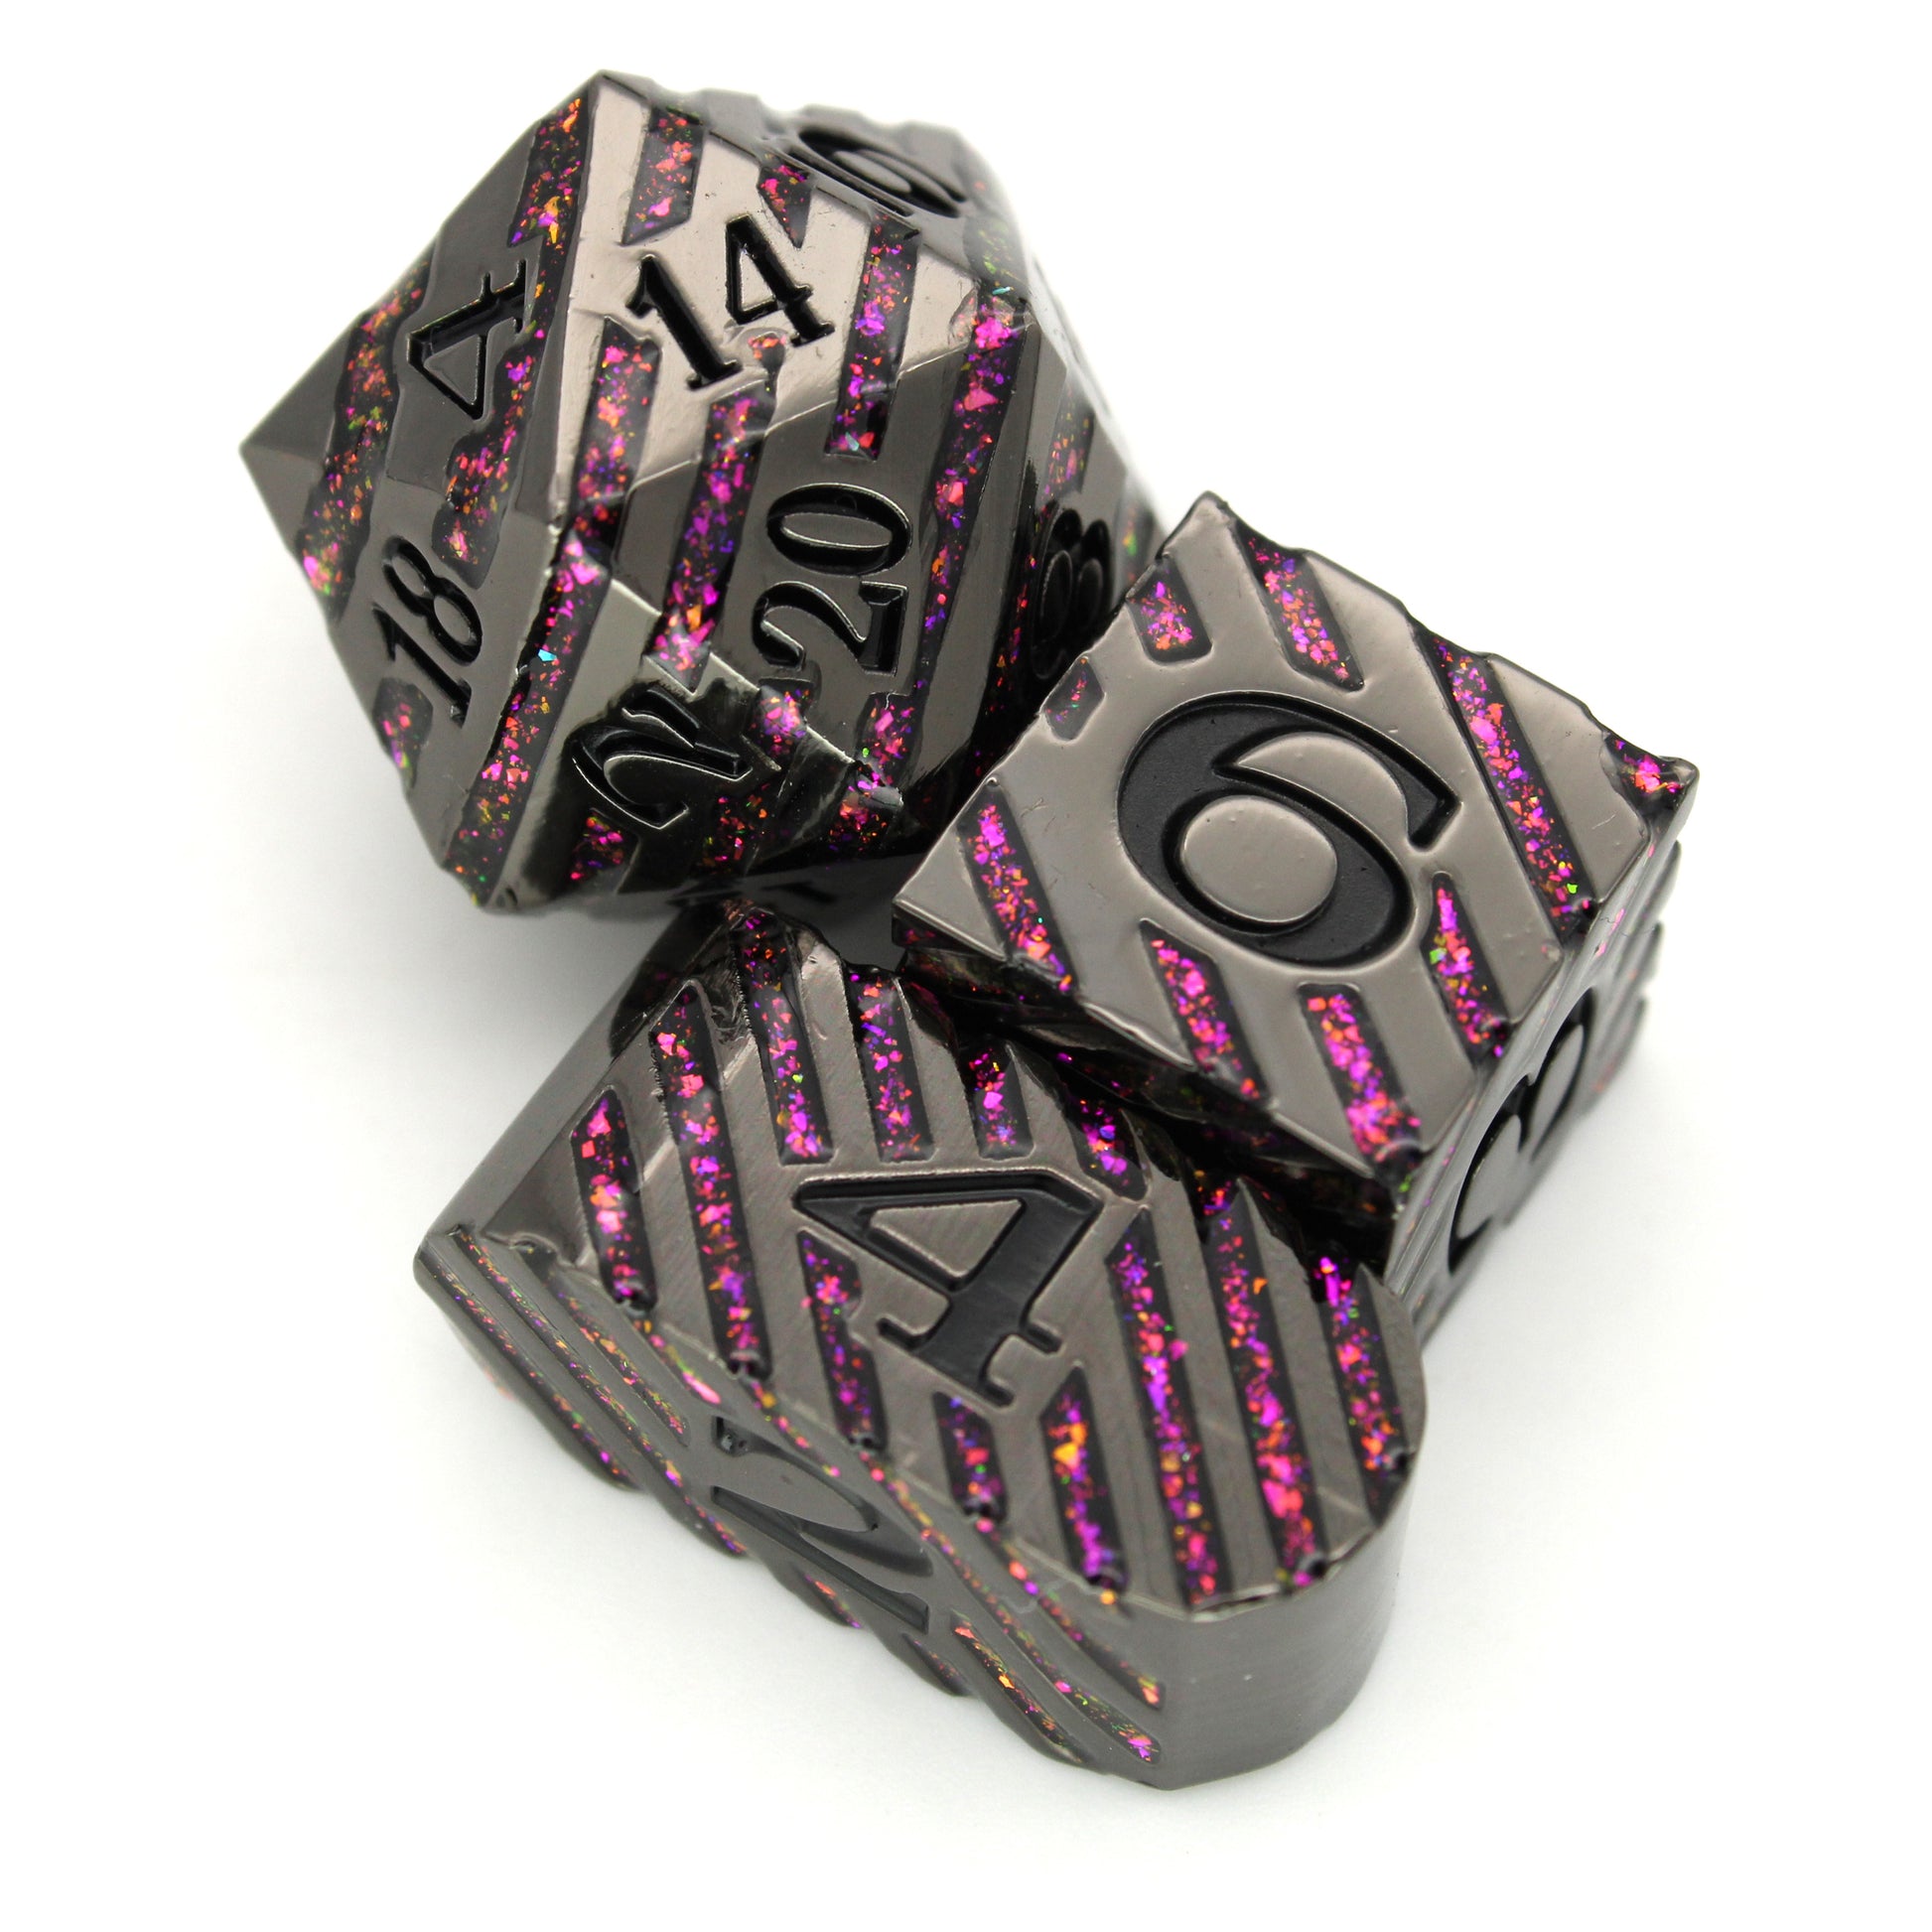 Red Run is an 8-piece black metal set banded in a wraparound enamel fill of dazzling magenta and red. 